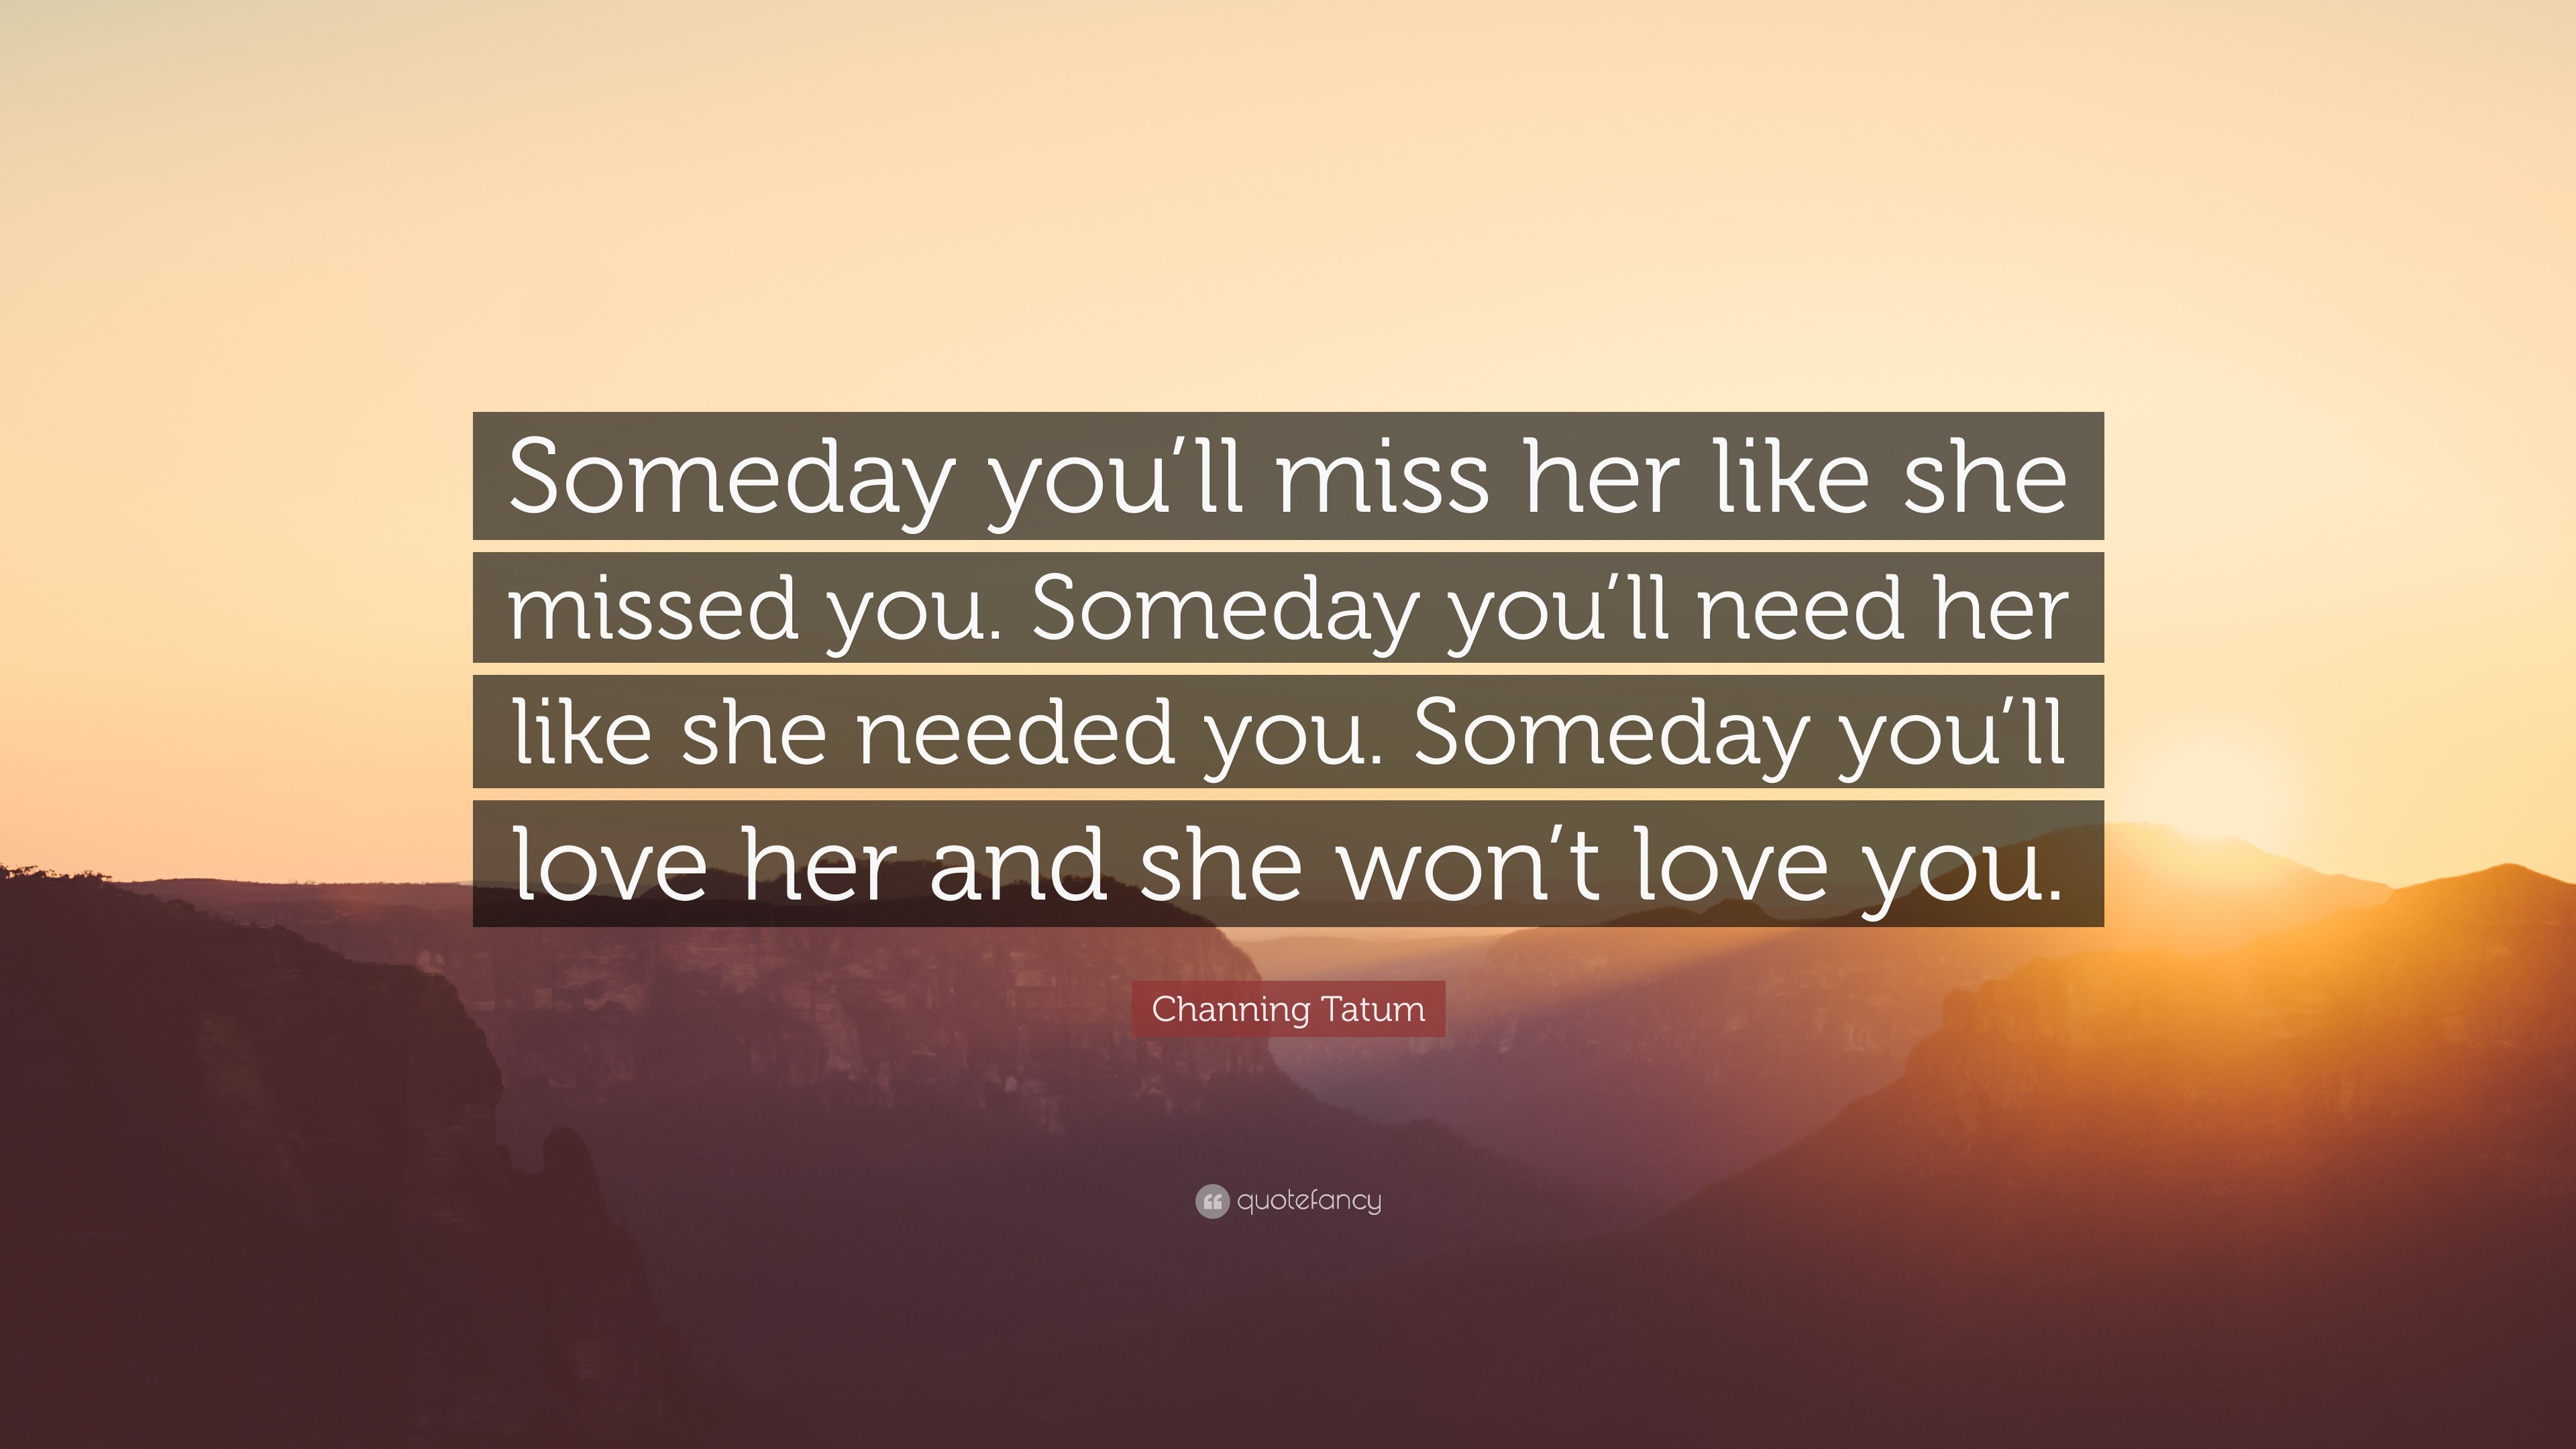 Channing Tatum Quote “Someday you ll miss her like she missed you